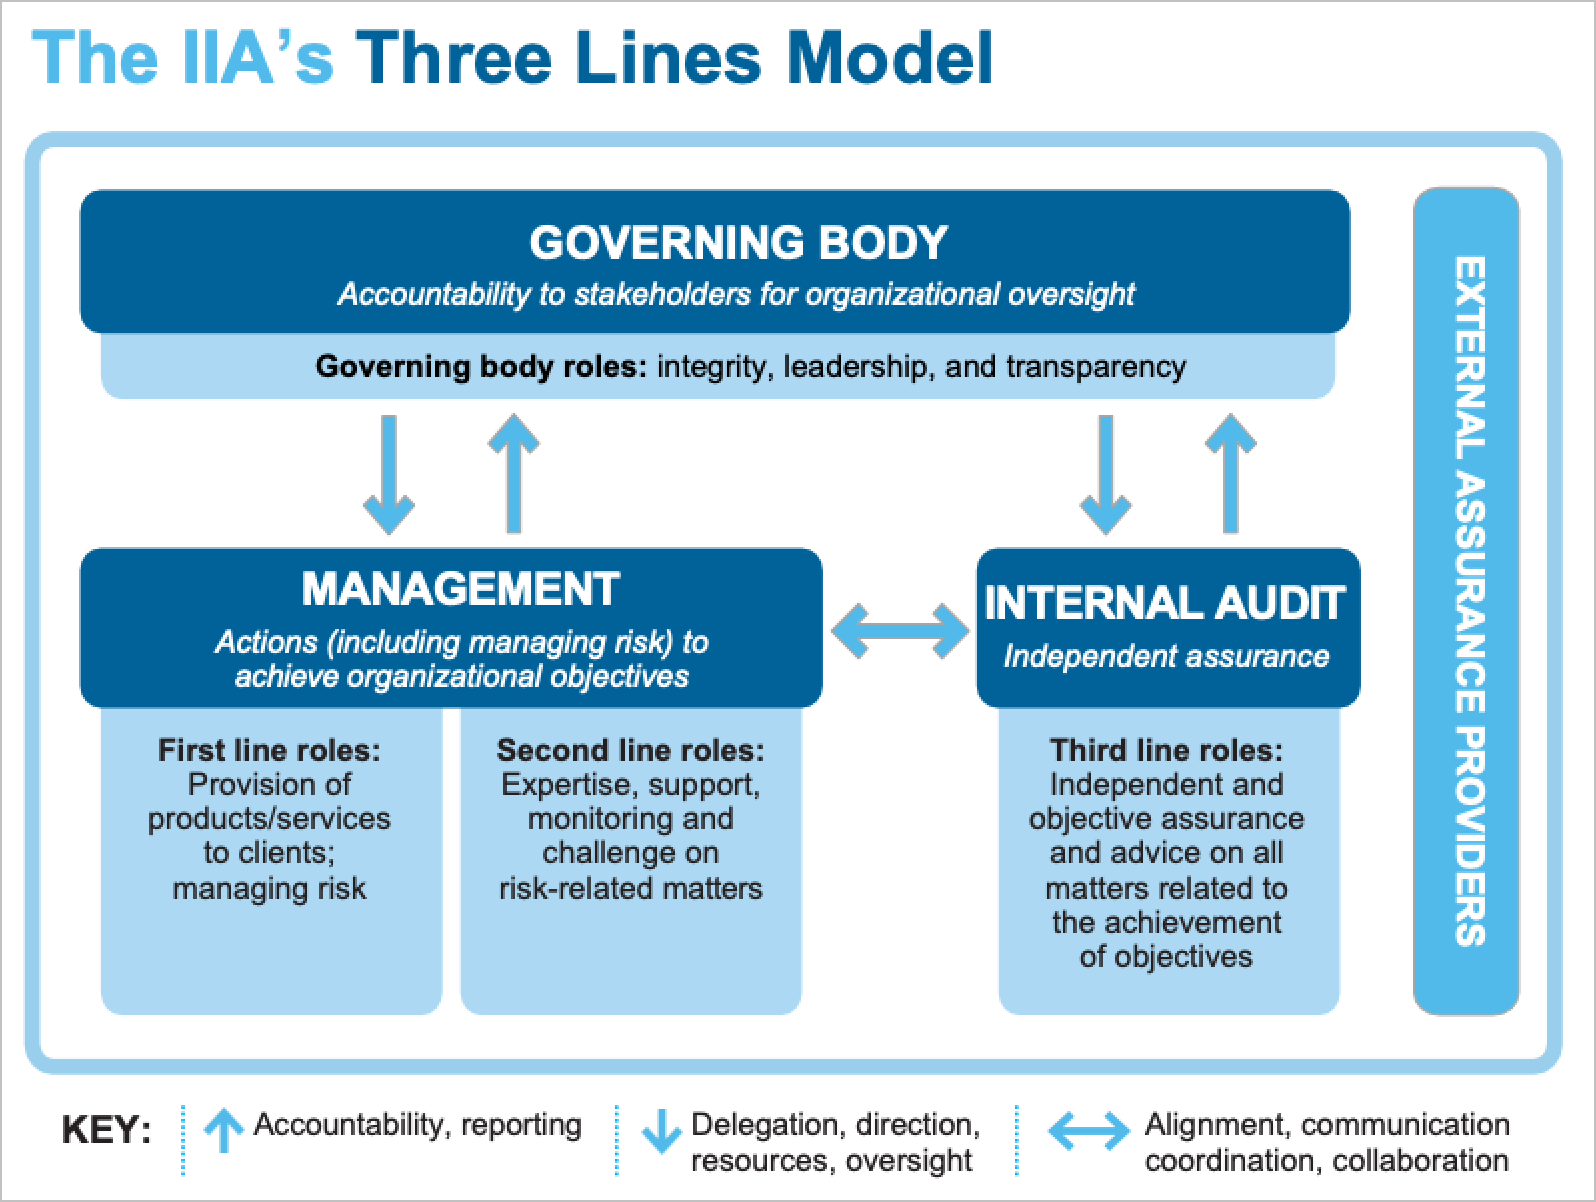 Source: The IIA’s Three Lines Model: An Update of the Three Lines of Defense, page 4.